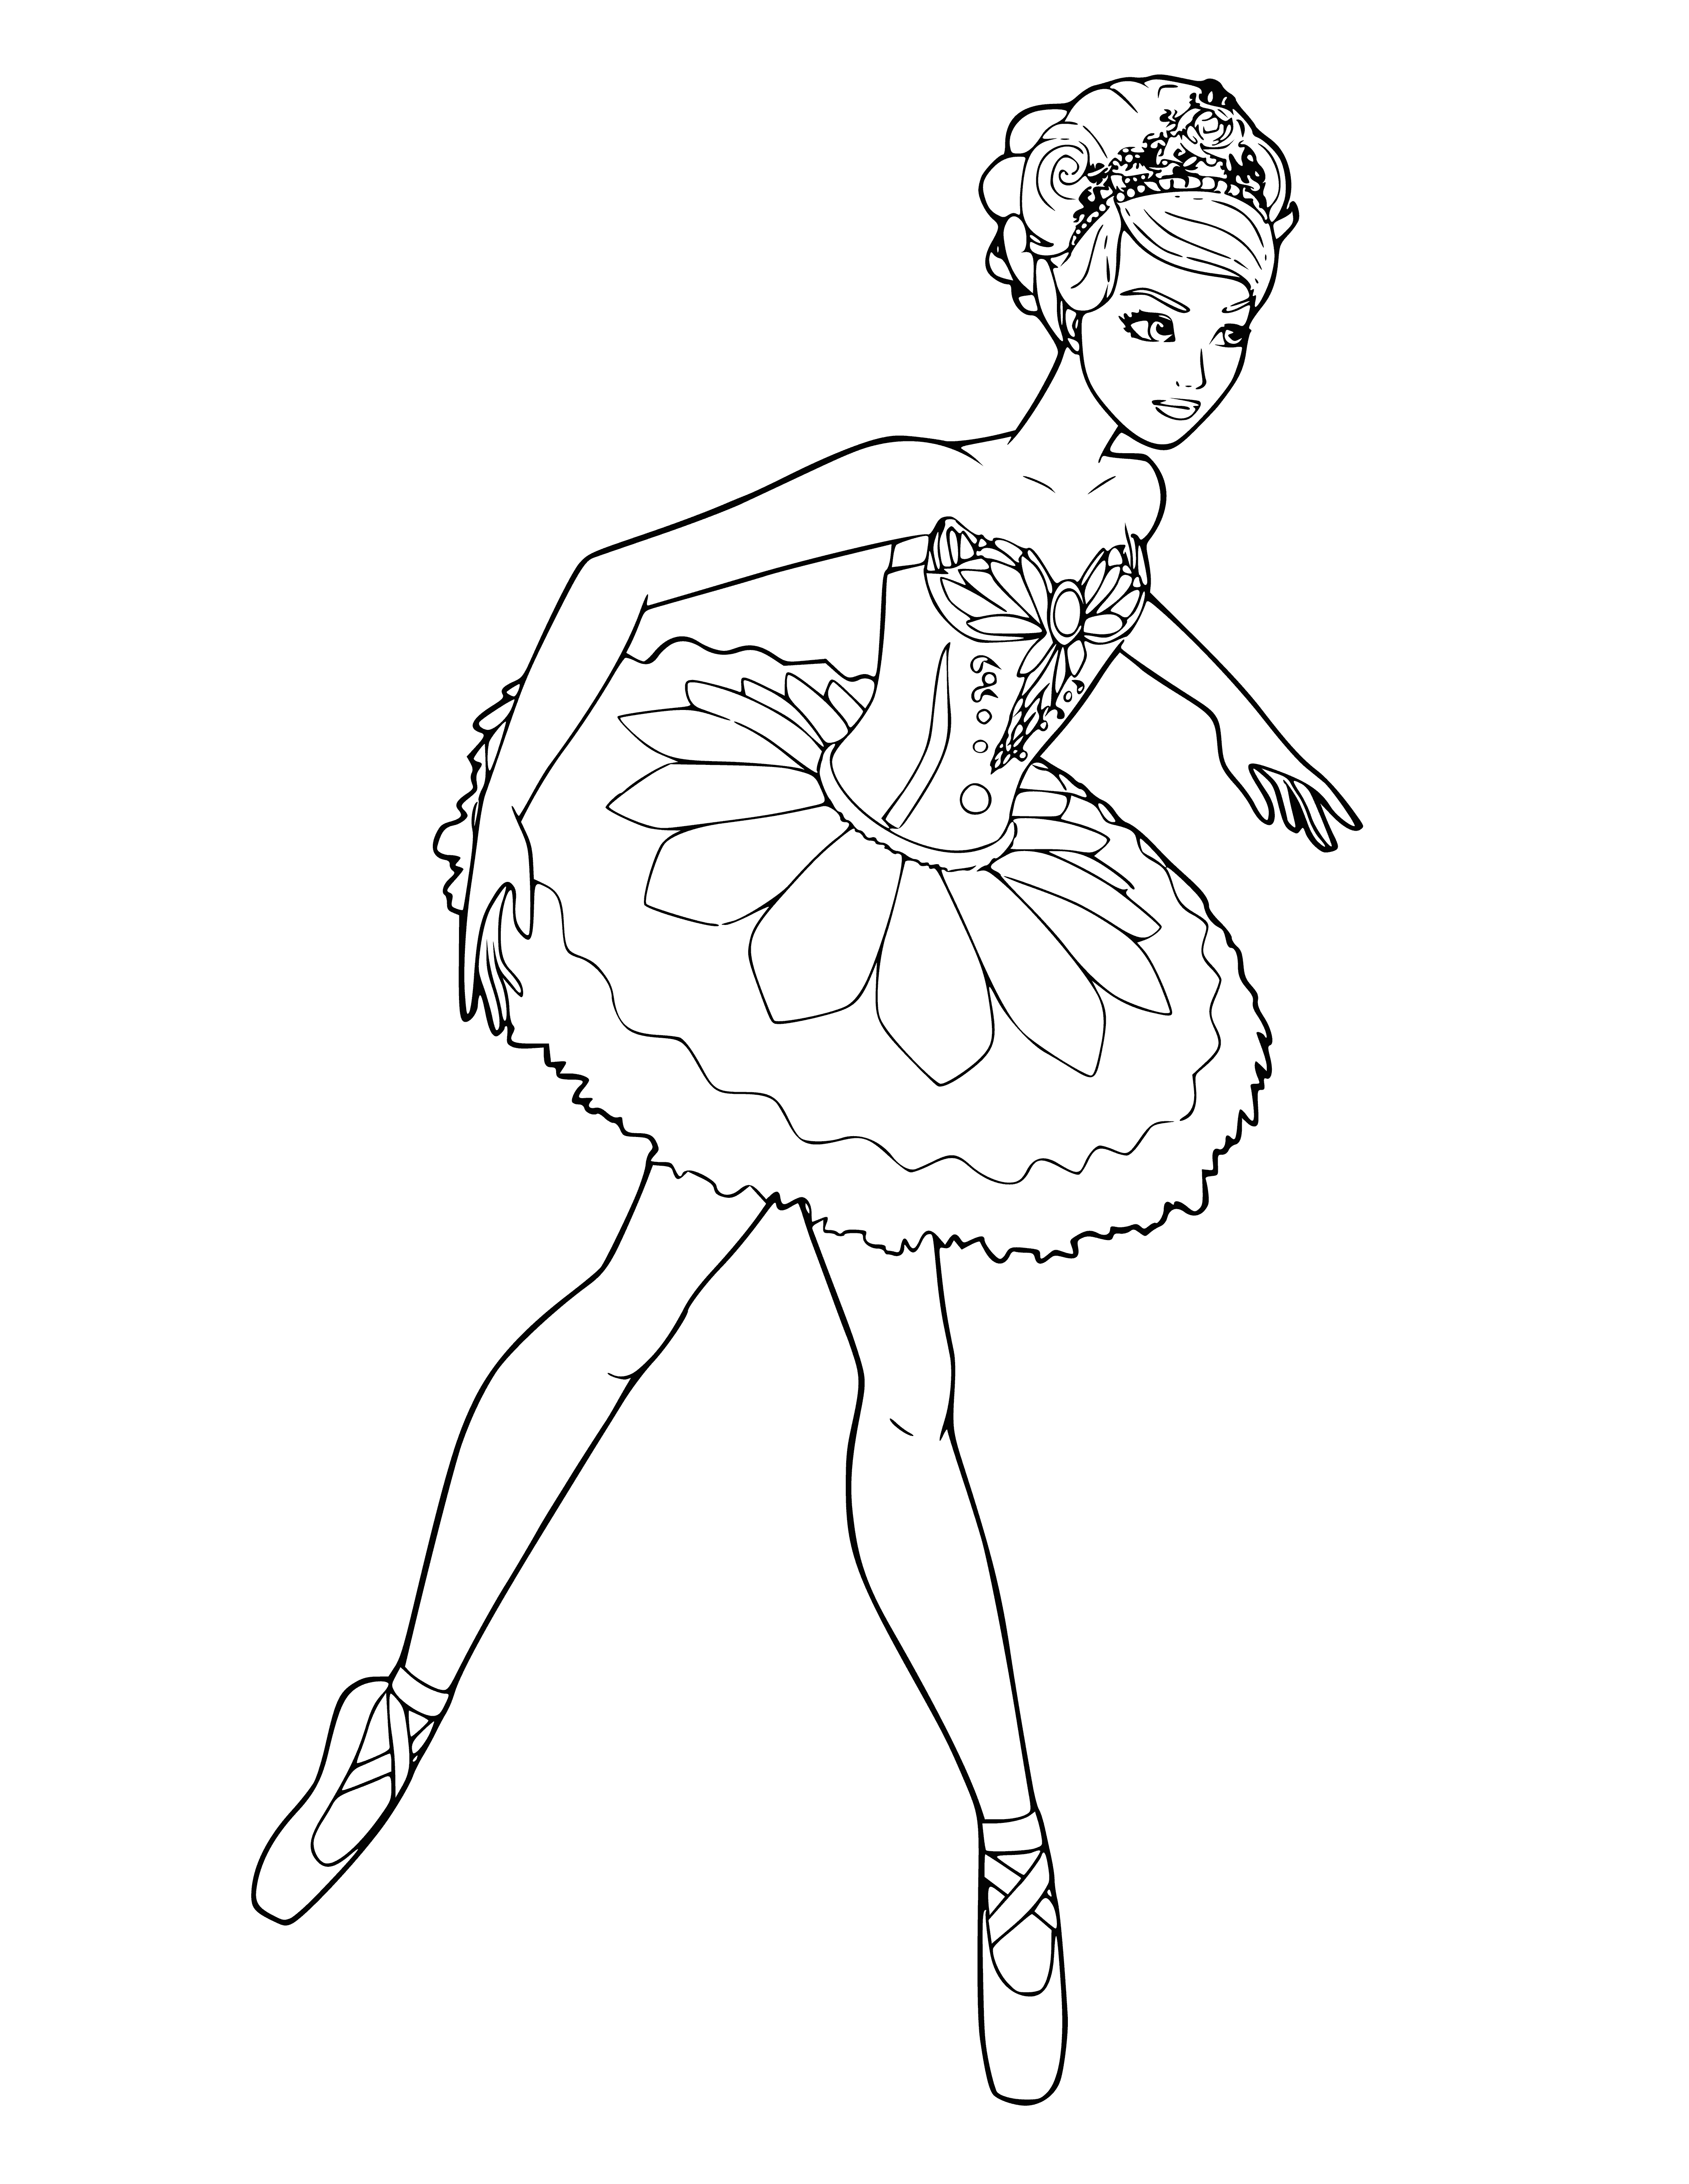 coloring page: #ballerinas

3 ballerinas stand holding hands, wearing pink tutus & white leotards with hair in tight buns. Smiling! #ballerinas